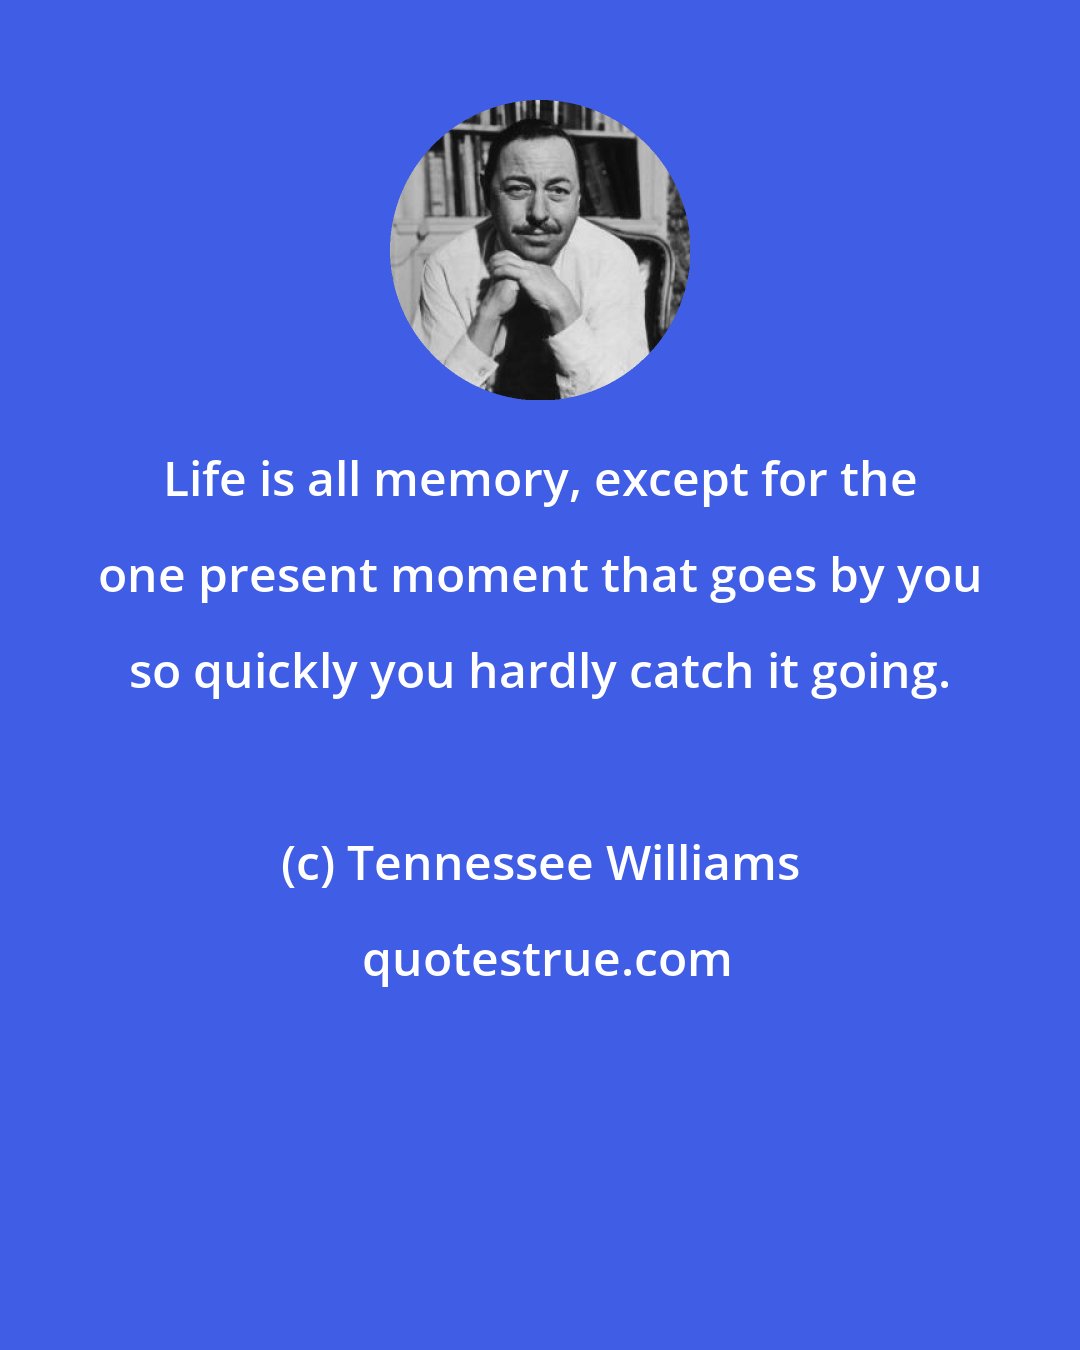 Tennessee Williams: Life is all memory, except for the one present moment that goes by you so quickly you hardly catch it going.